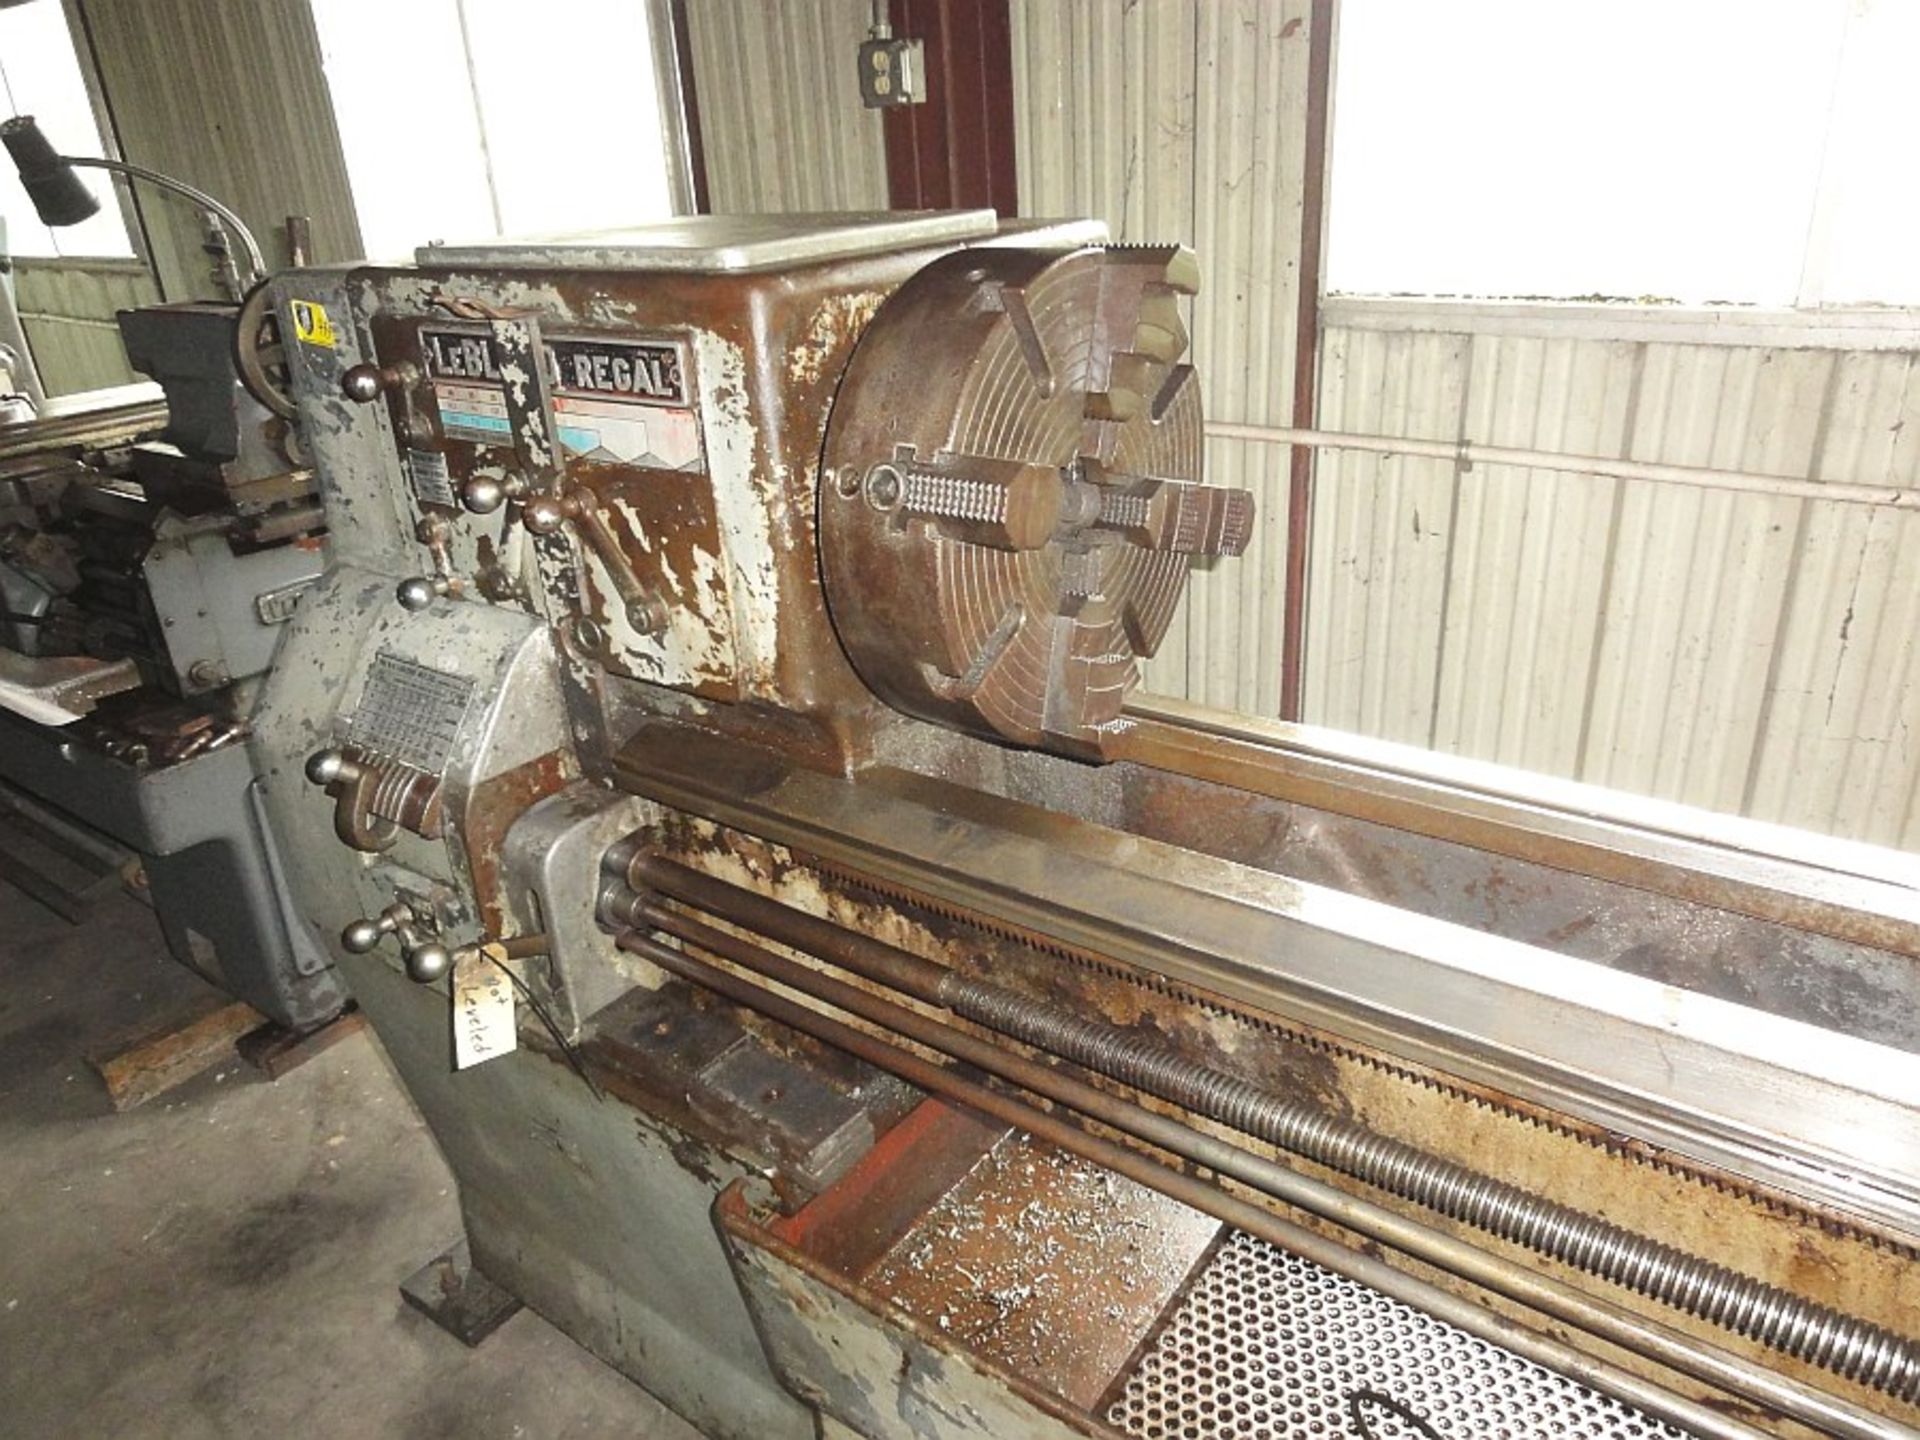 LeBlonde Engine Lathe, 17" Swing x 80" Centers, 102" Bed, 15" 4-jaw Chuck, Taper Attachment, - Image 2 of 3